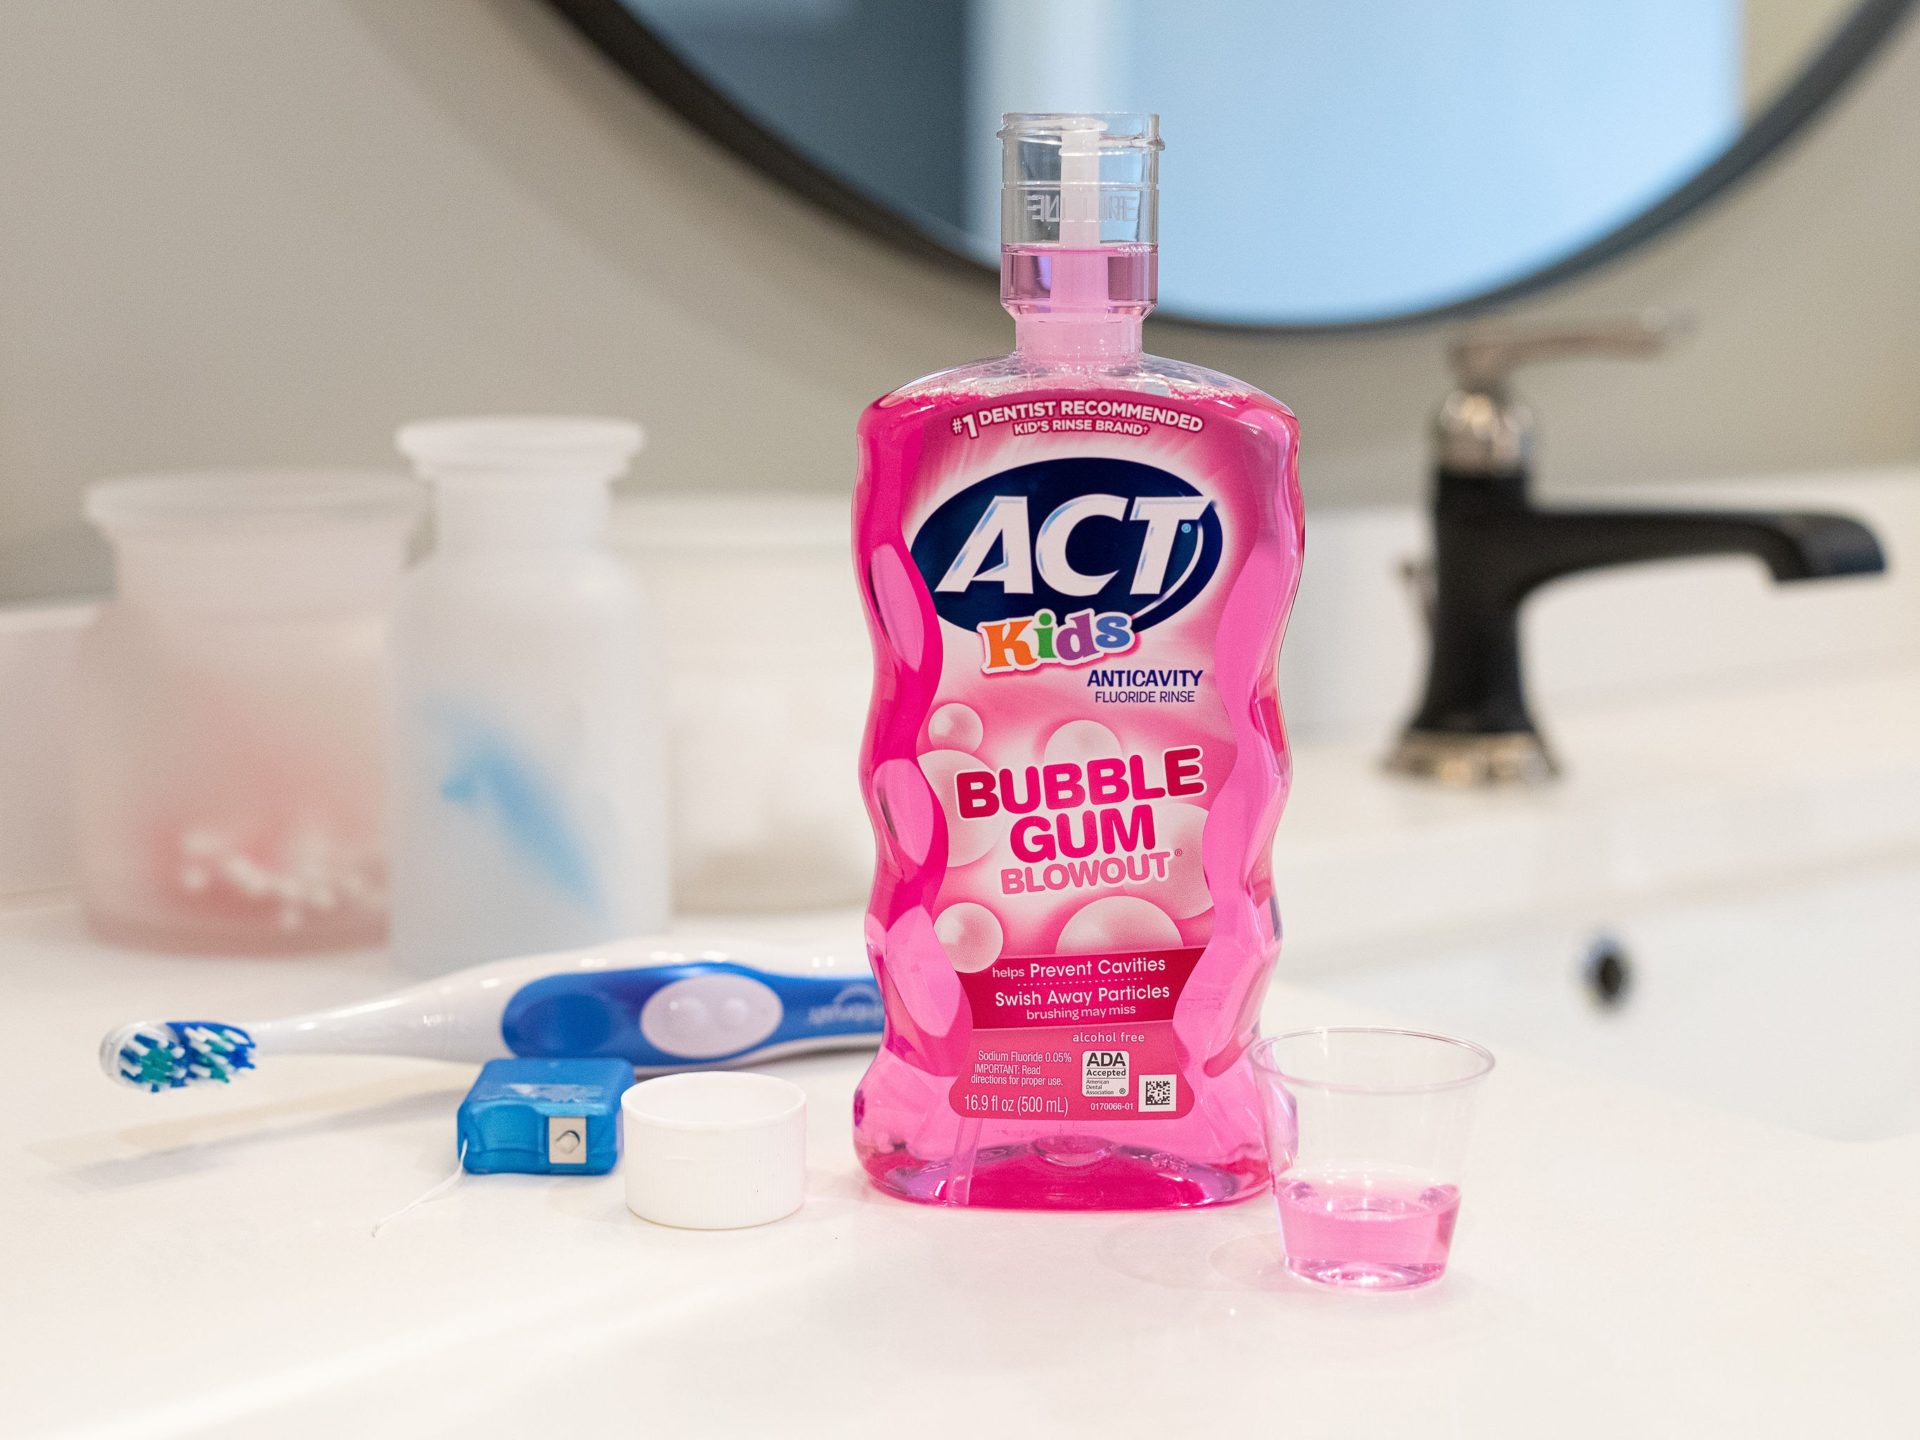 Act Mouthwash As Low As $2.74 At Kroger